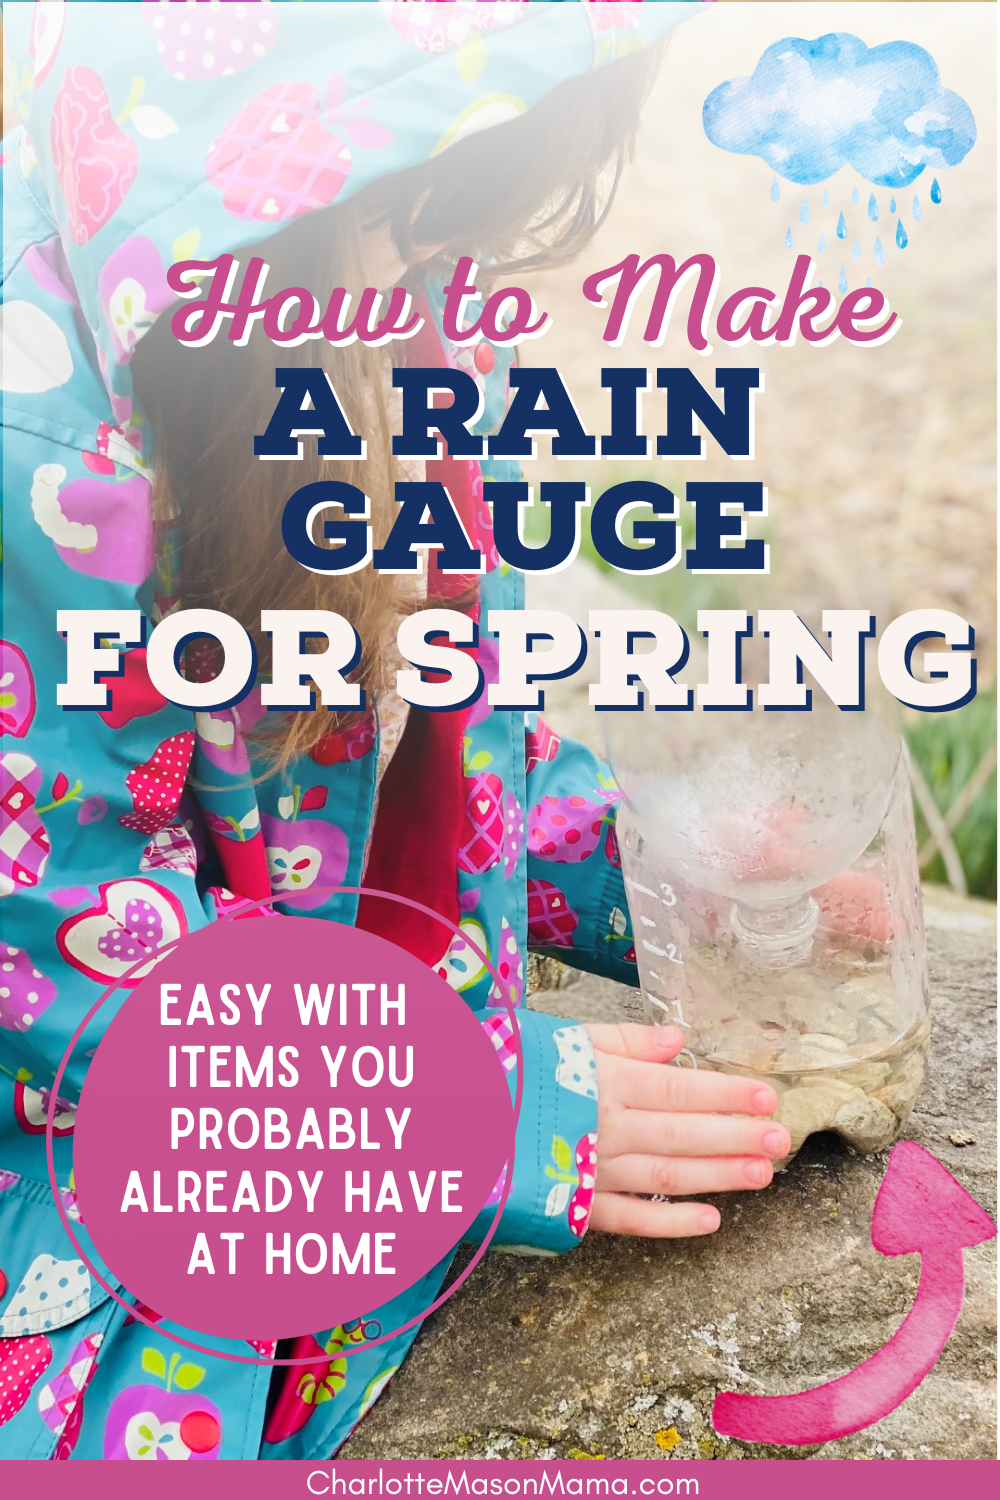 How to Make a Rain Gauge for Spring